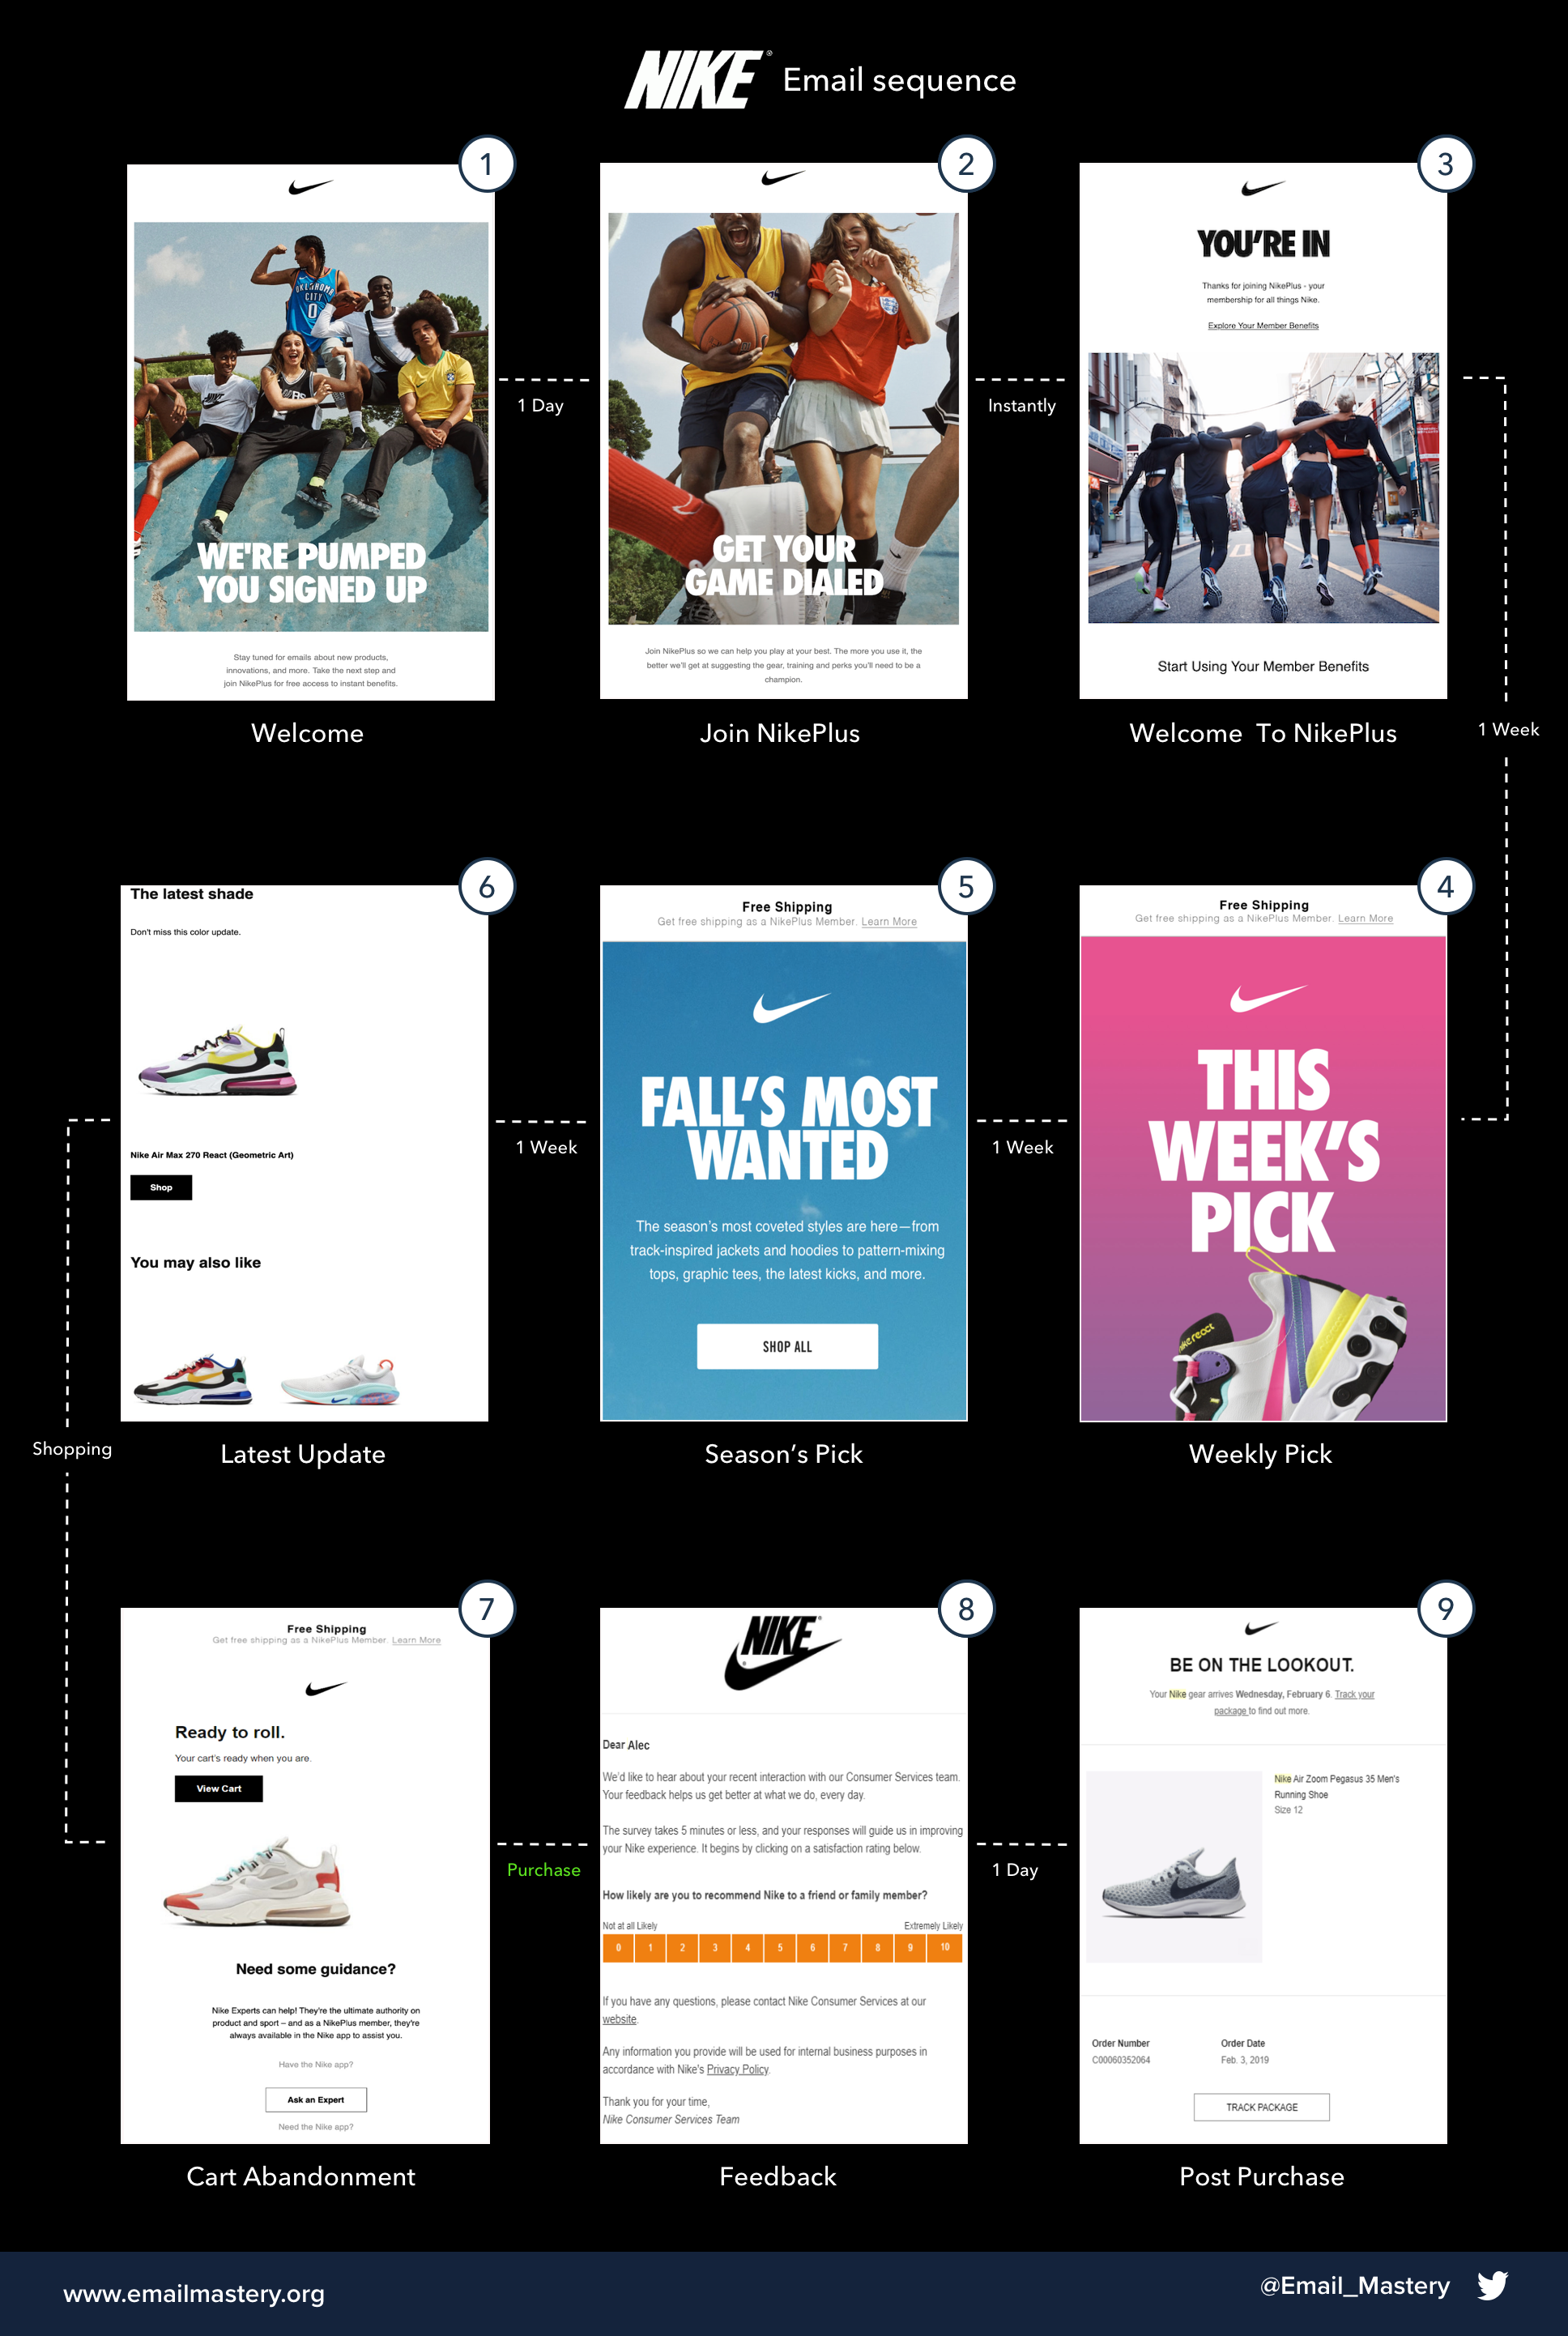 Ambassadeur Passend Kan niet lezen of schrijven What can we learn from Nike's Email Sequence?